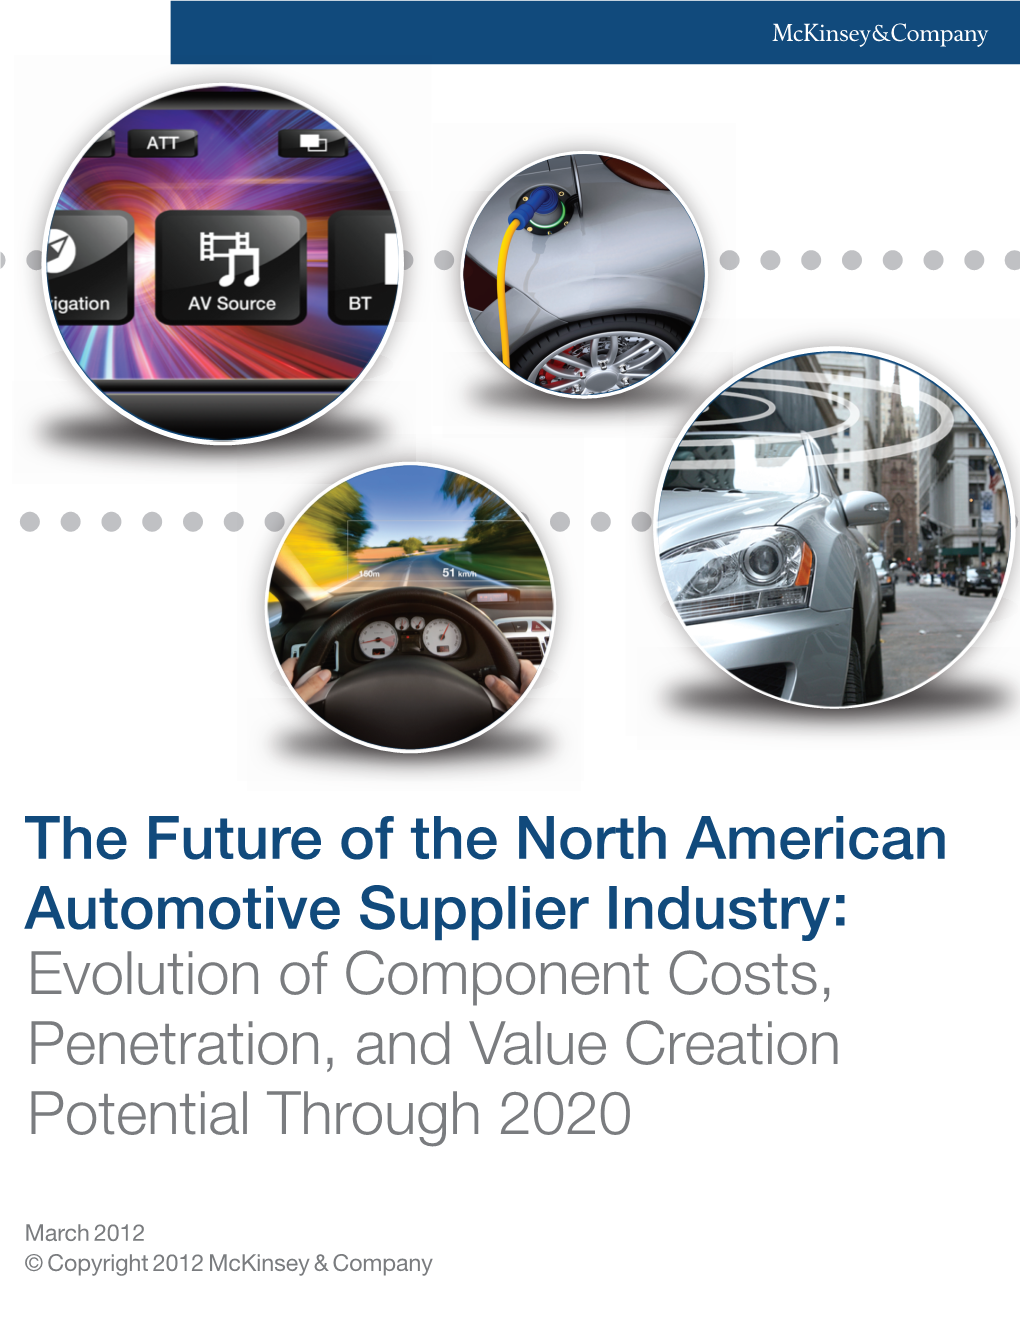 The Future of the North American Automotive Supplier Industry: Evolution of Component Costs, Penetration, and Value Creation Potential Through 2020